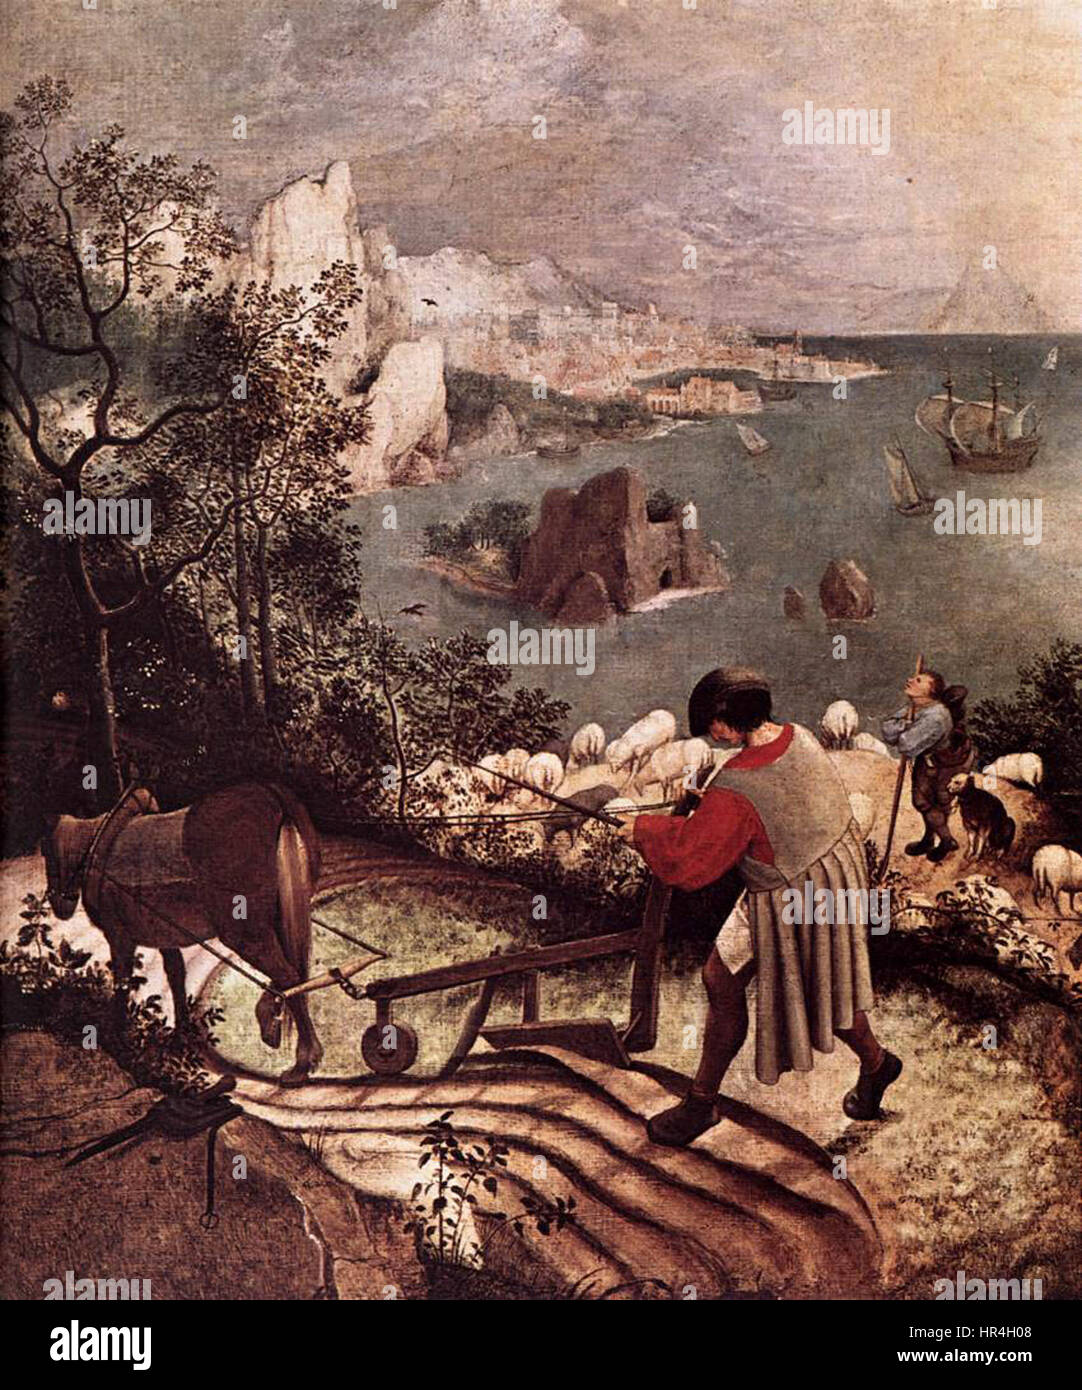 Pieter Bruegel the Elder - Landscape with the Fall of Icarus (detail) - WGA03323 Stock Photo